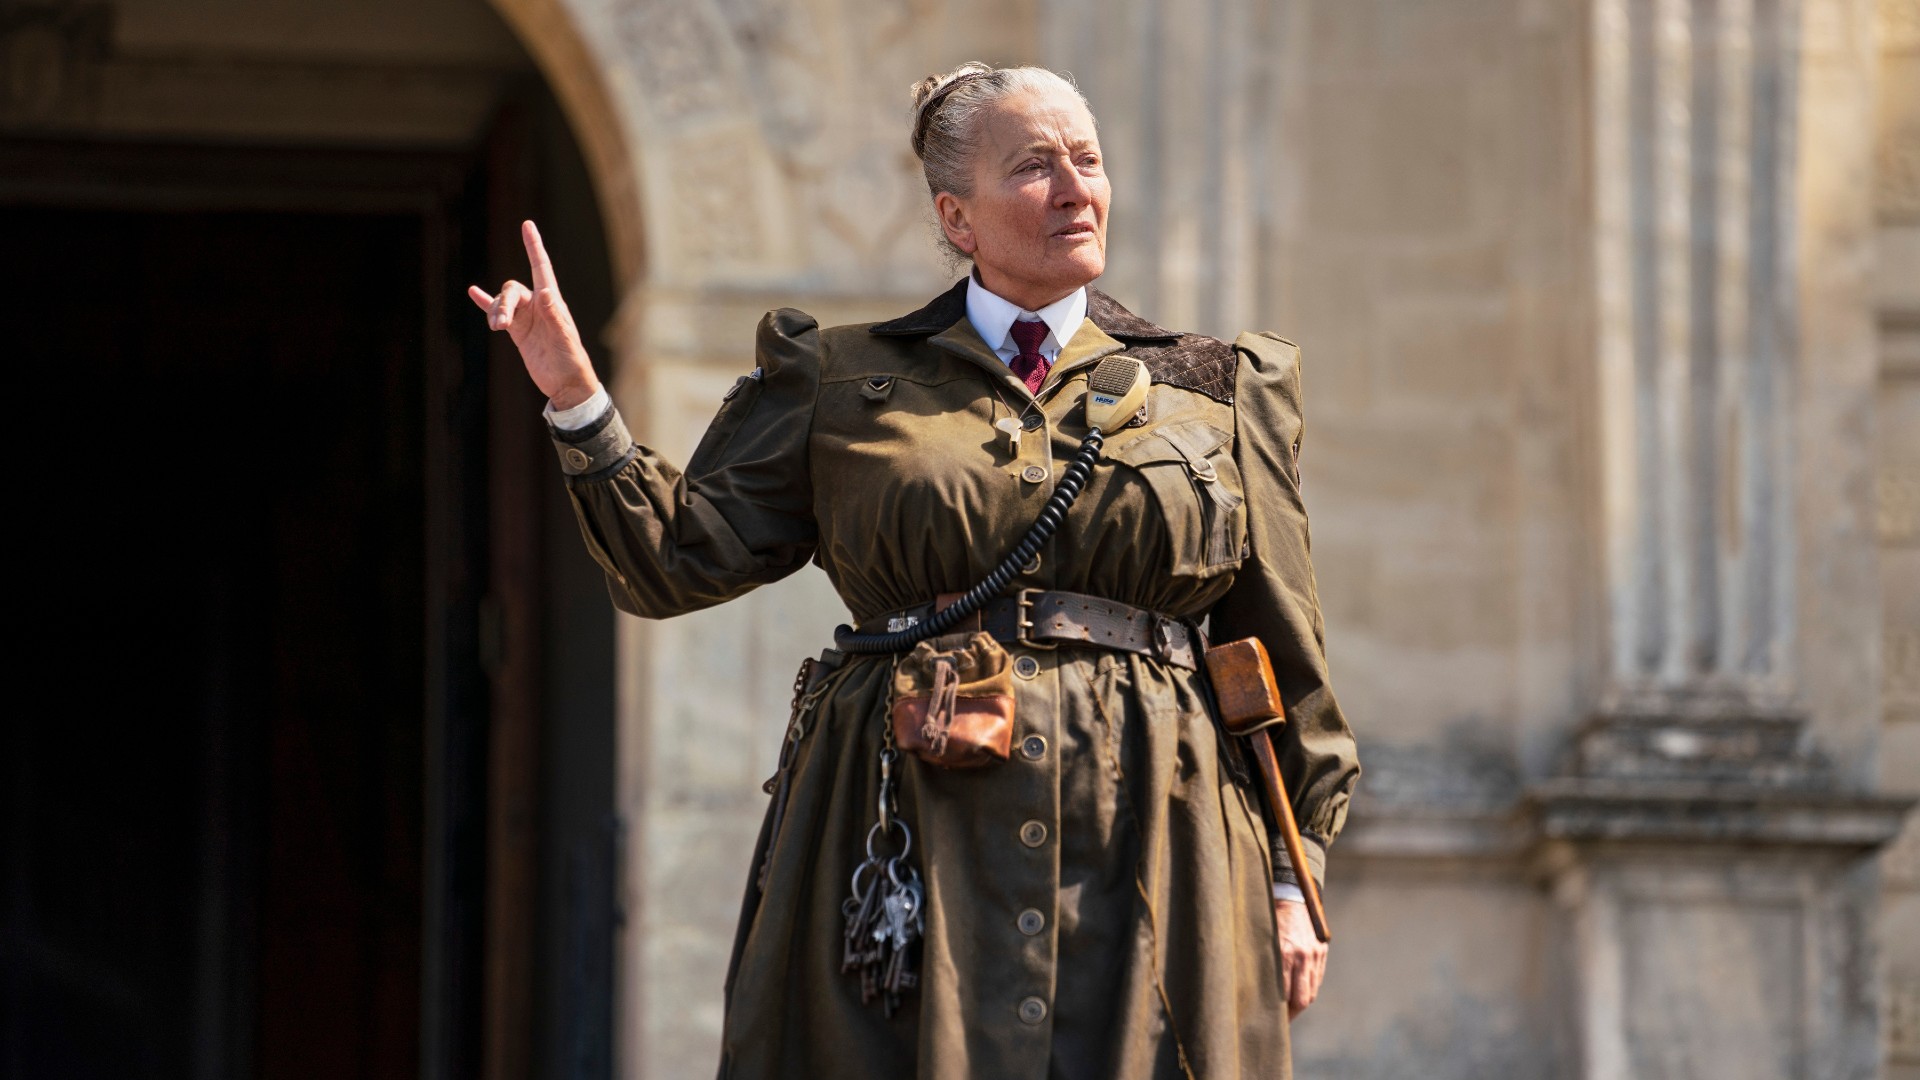 WATCH: Emma Thompson Is a Menacing Miss Trunchbull in 'Matilda the Musical' Trailer